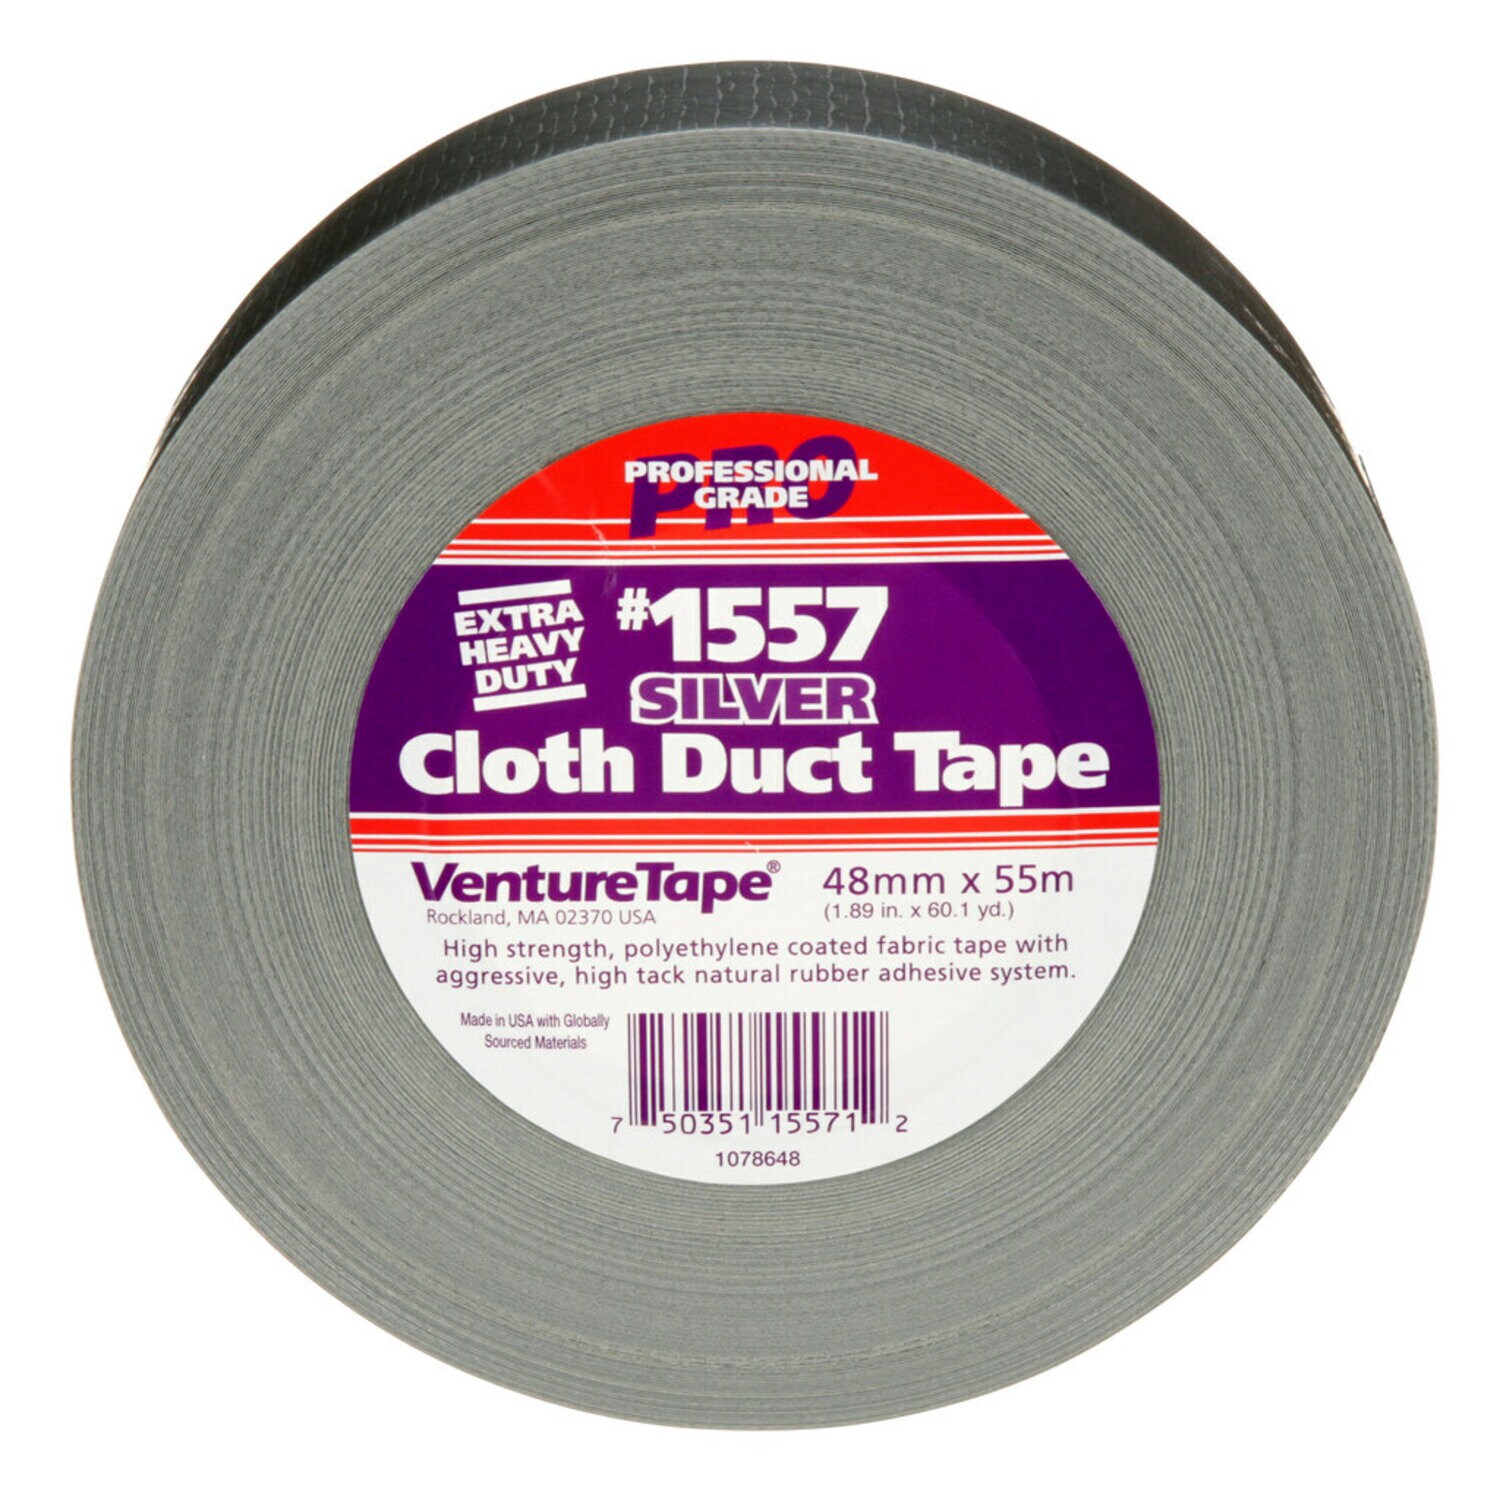 7100043944 - 3M Venture Tape Extreme Cloth Duct Tape 1557, Silver, 48 mm x 55 m
(1.88 in x 60.1 yd), 24/Case